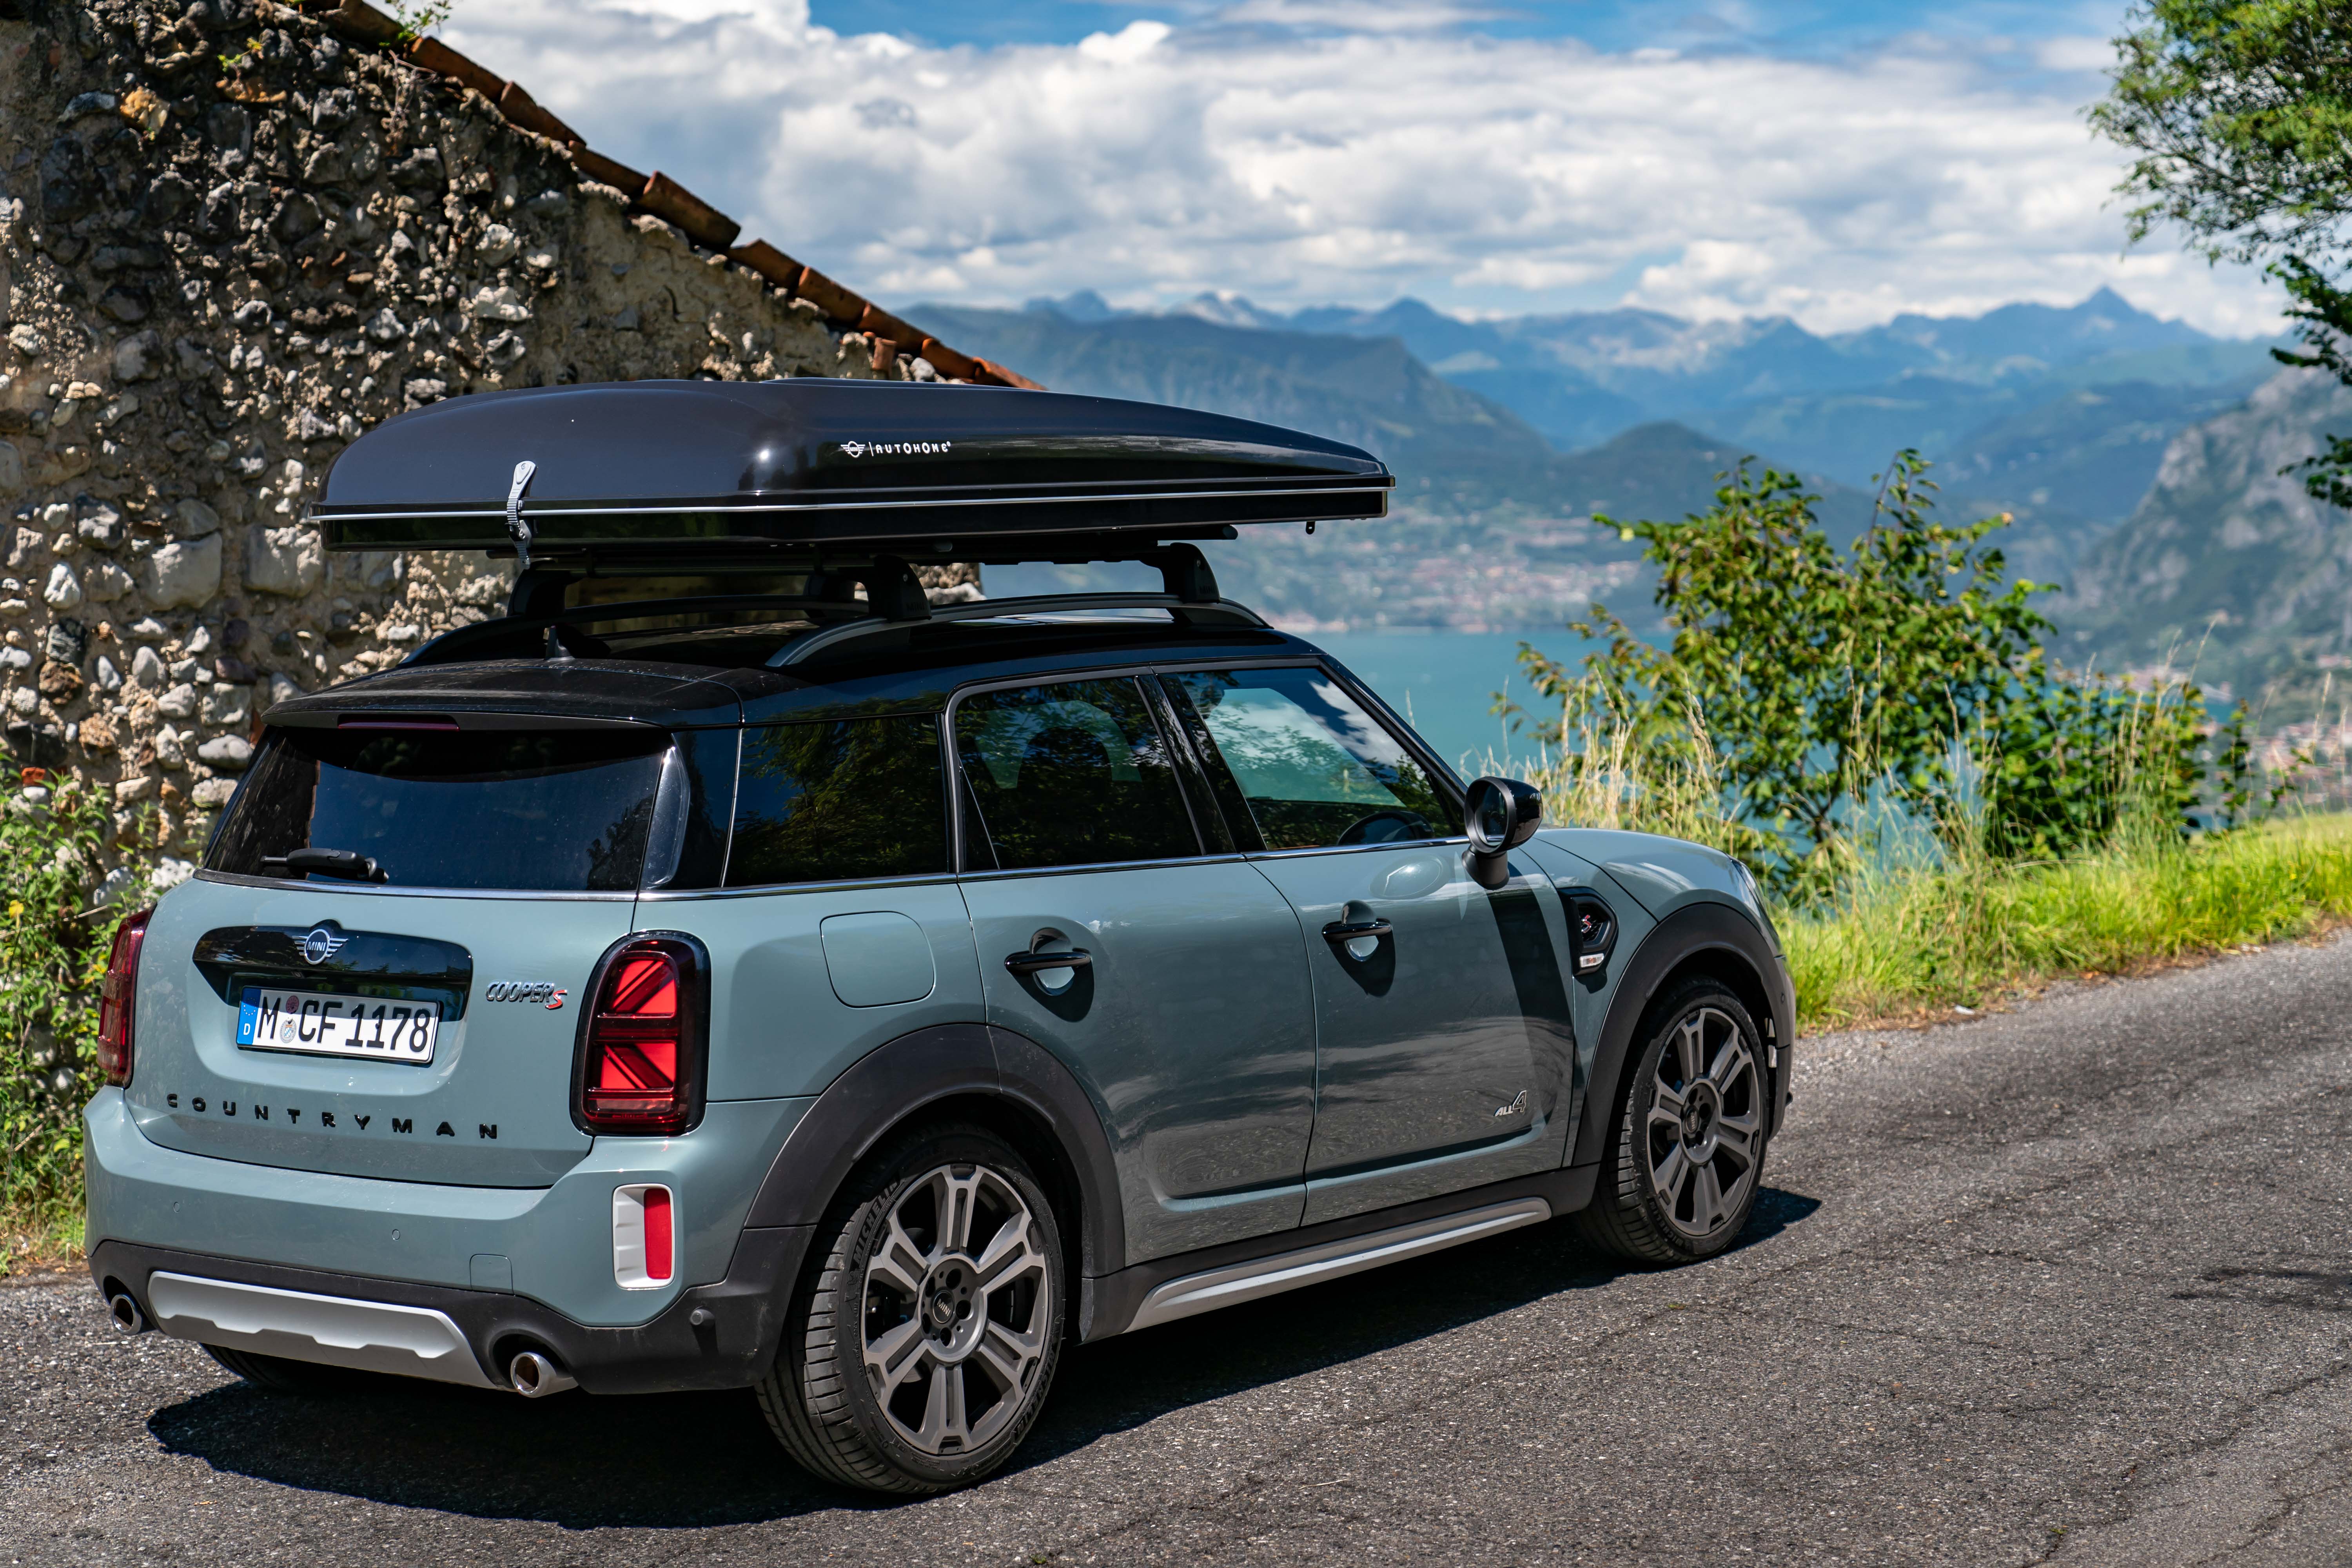 2020 MINI Cooper S Countryman with Roof Tent Paul Tan's Automotive News